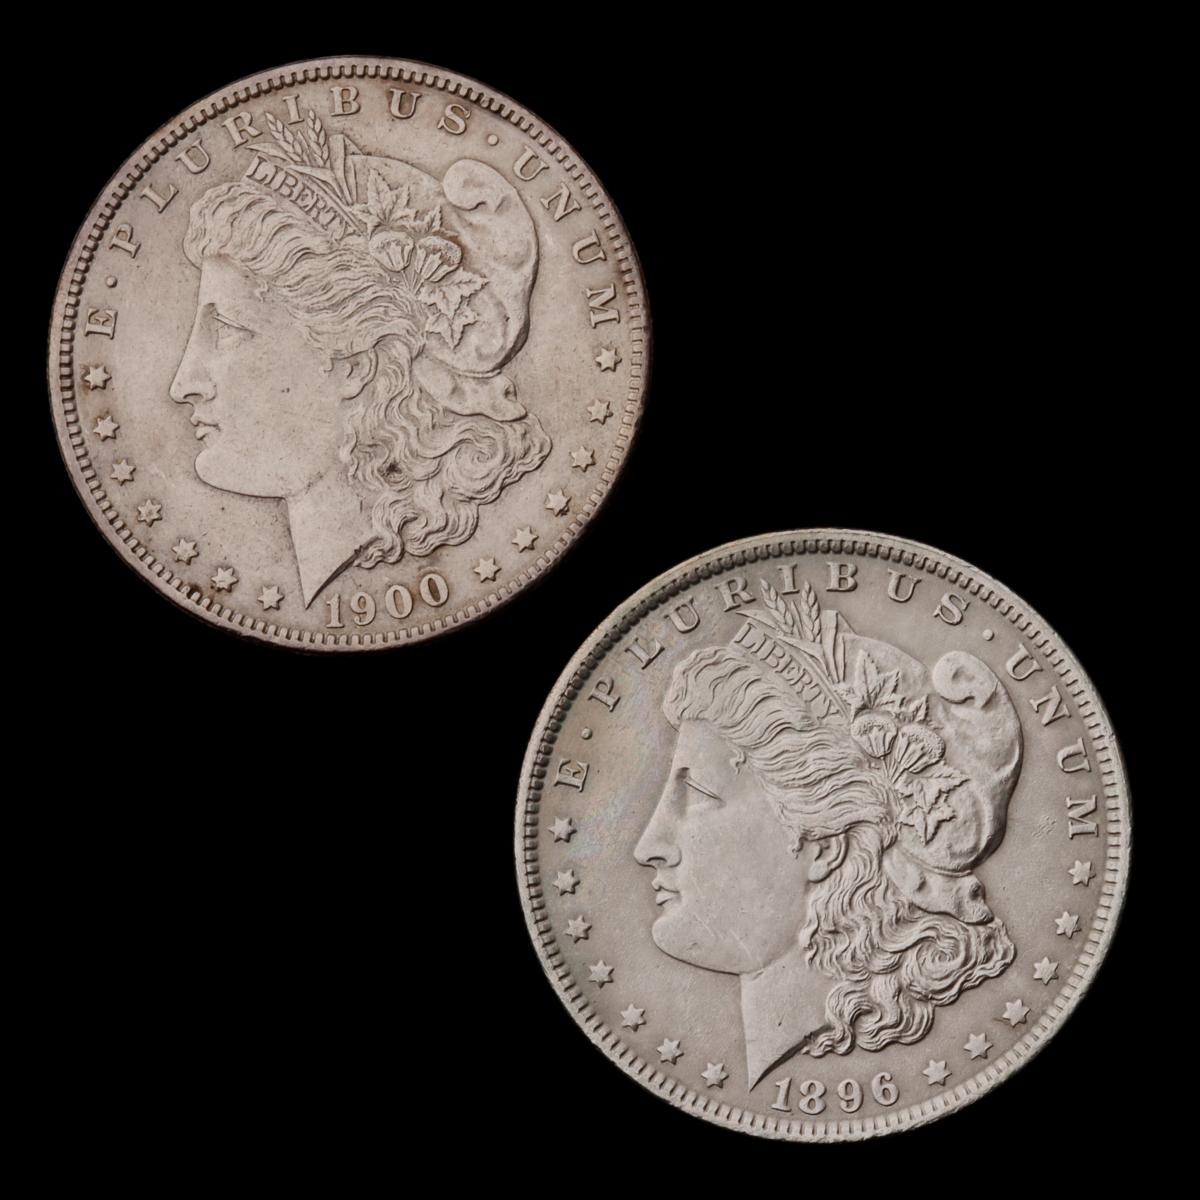 TWO HIGHER GRADE MORGAN SILVER DOLLARS, 1896 AND 1900